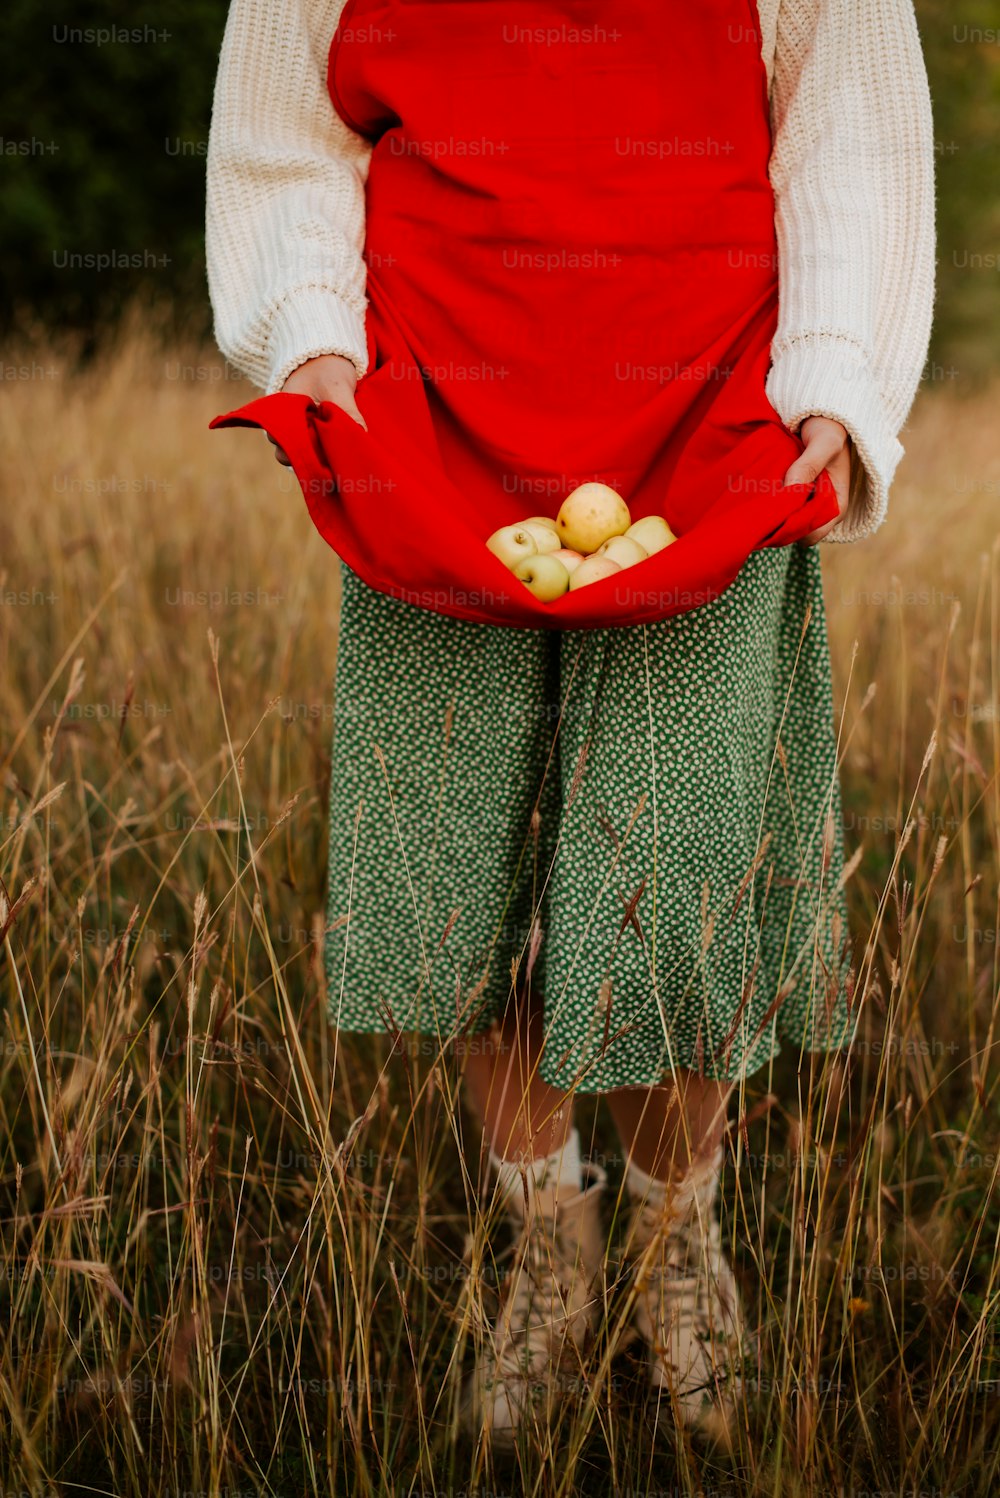 a person standing in a field holding a bag of apples